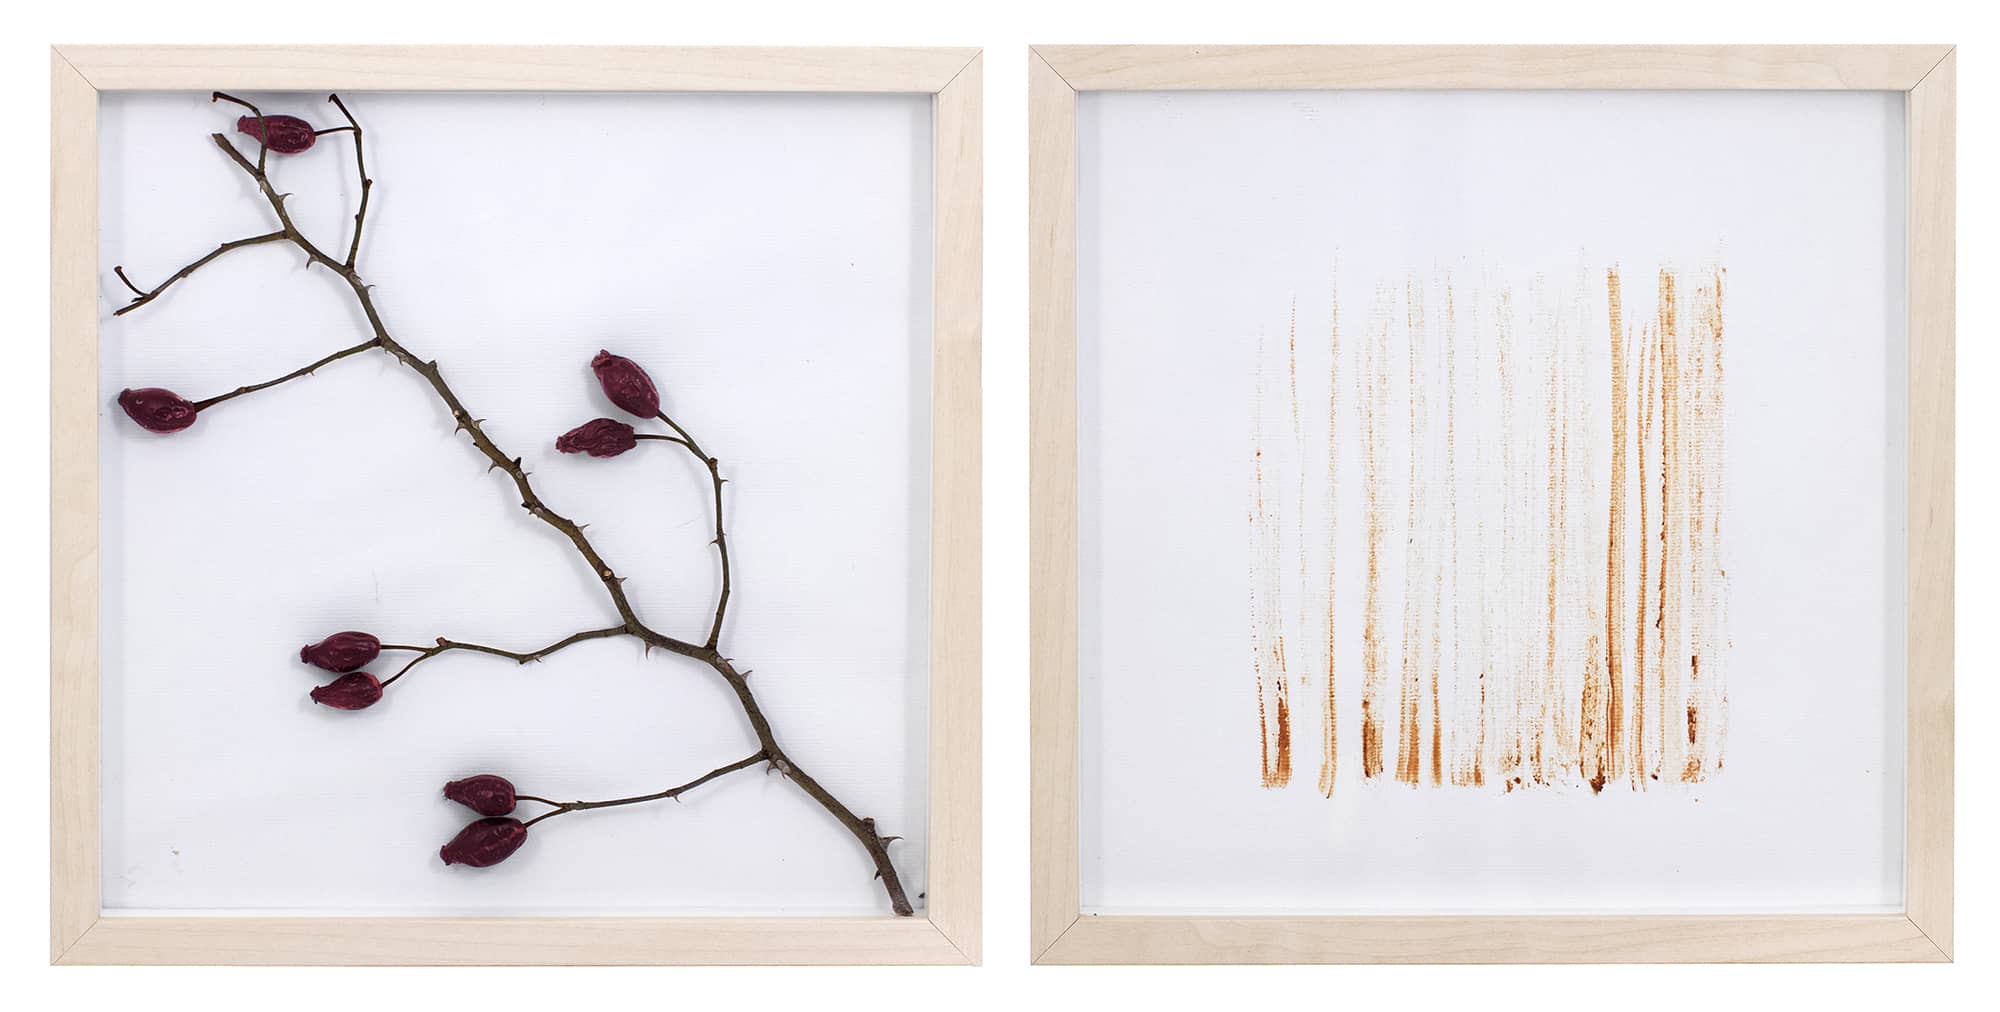 'Rosa Canina', assemblage (wild rose plant and organic pigment on paper, framed). Artwork by Francesca Virginia Coppola